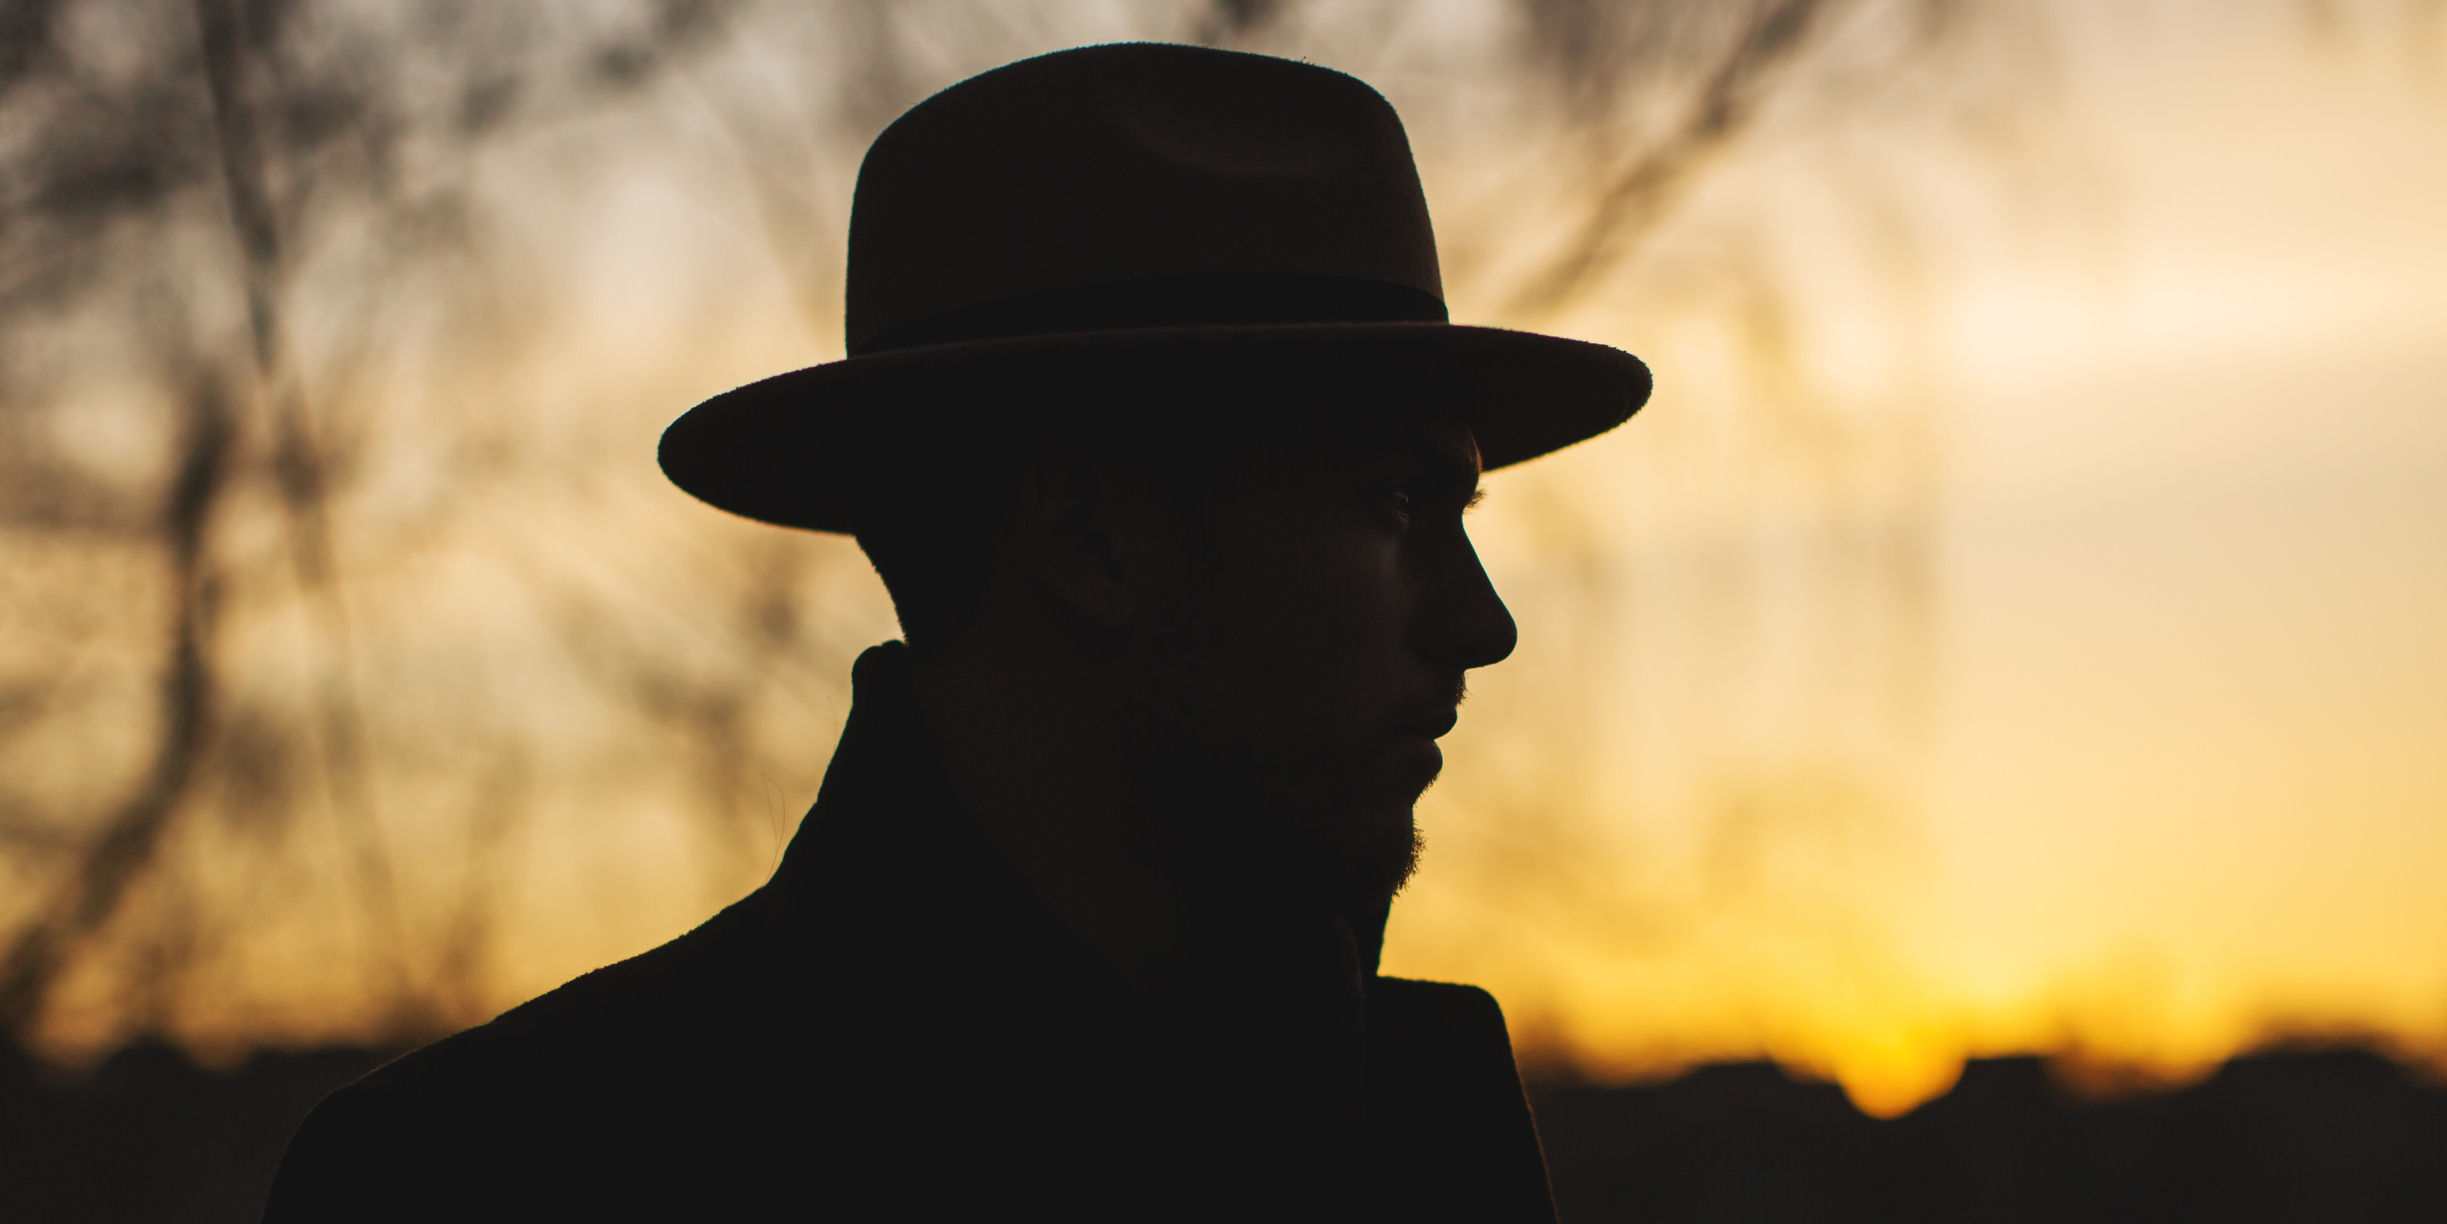 Silhouette of a person wearing a fedora hat against a sunset backdrop